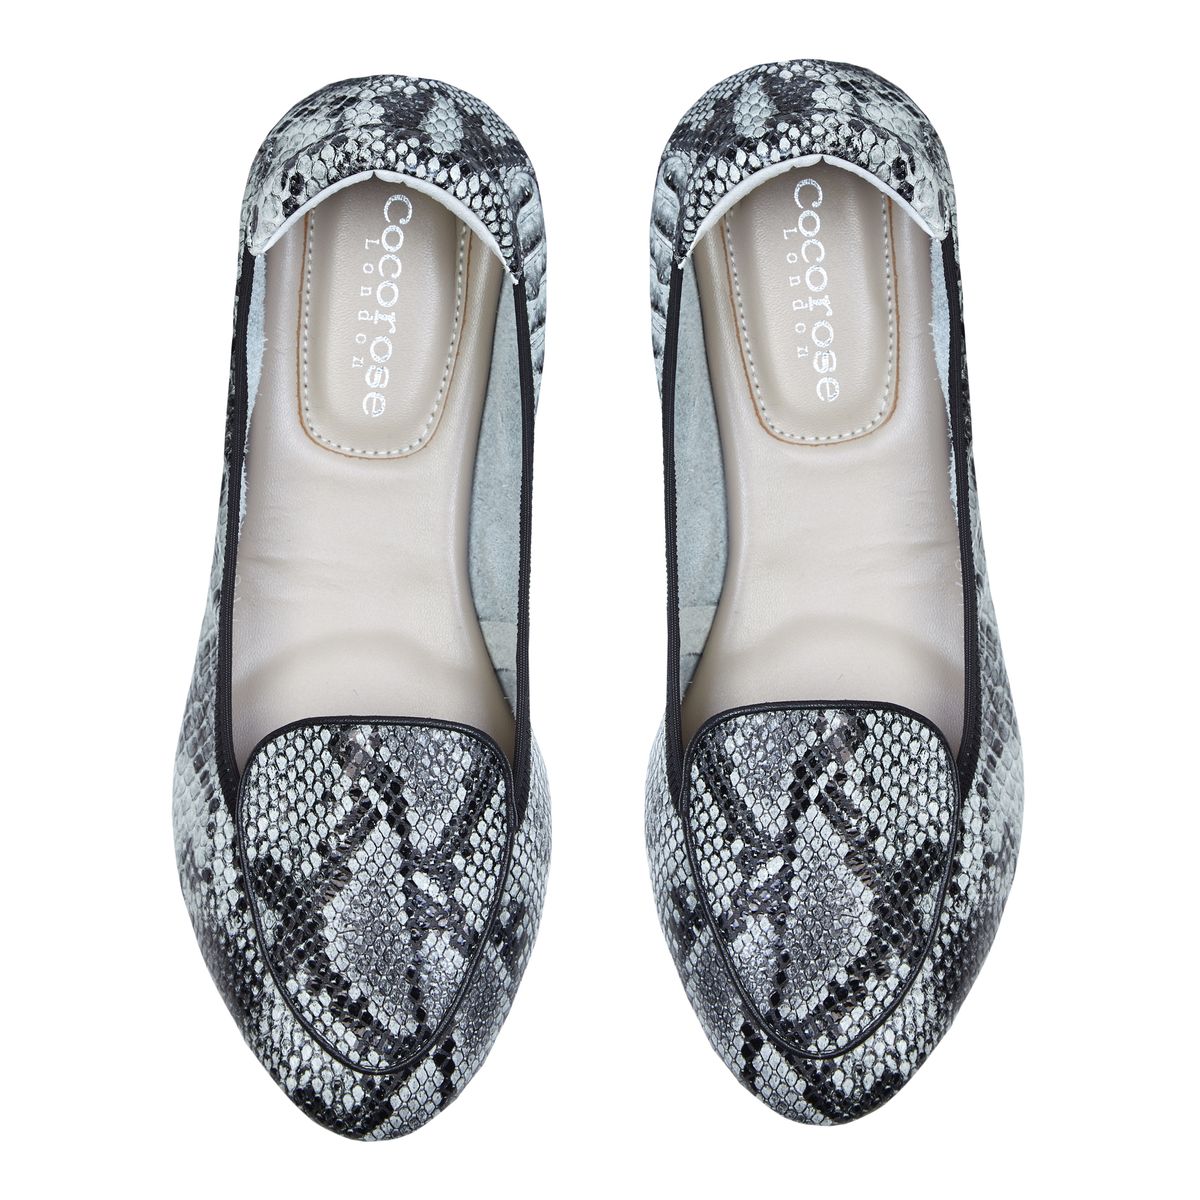 Grey snake print loafer from Cocorose London